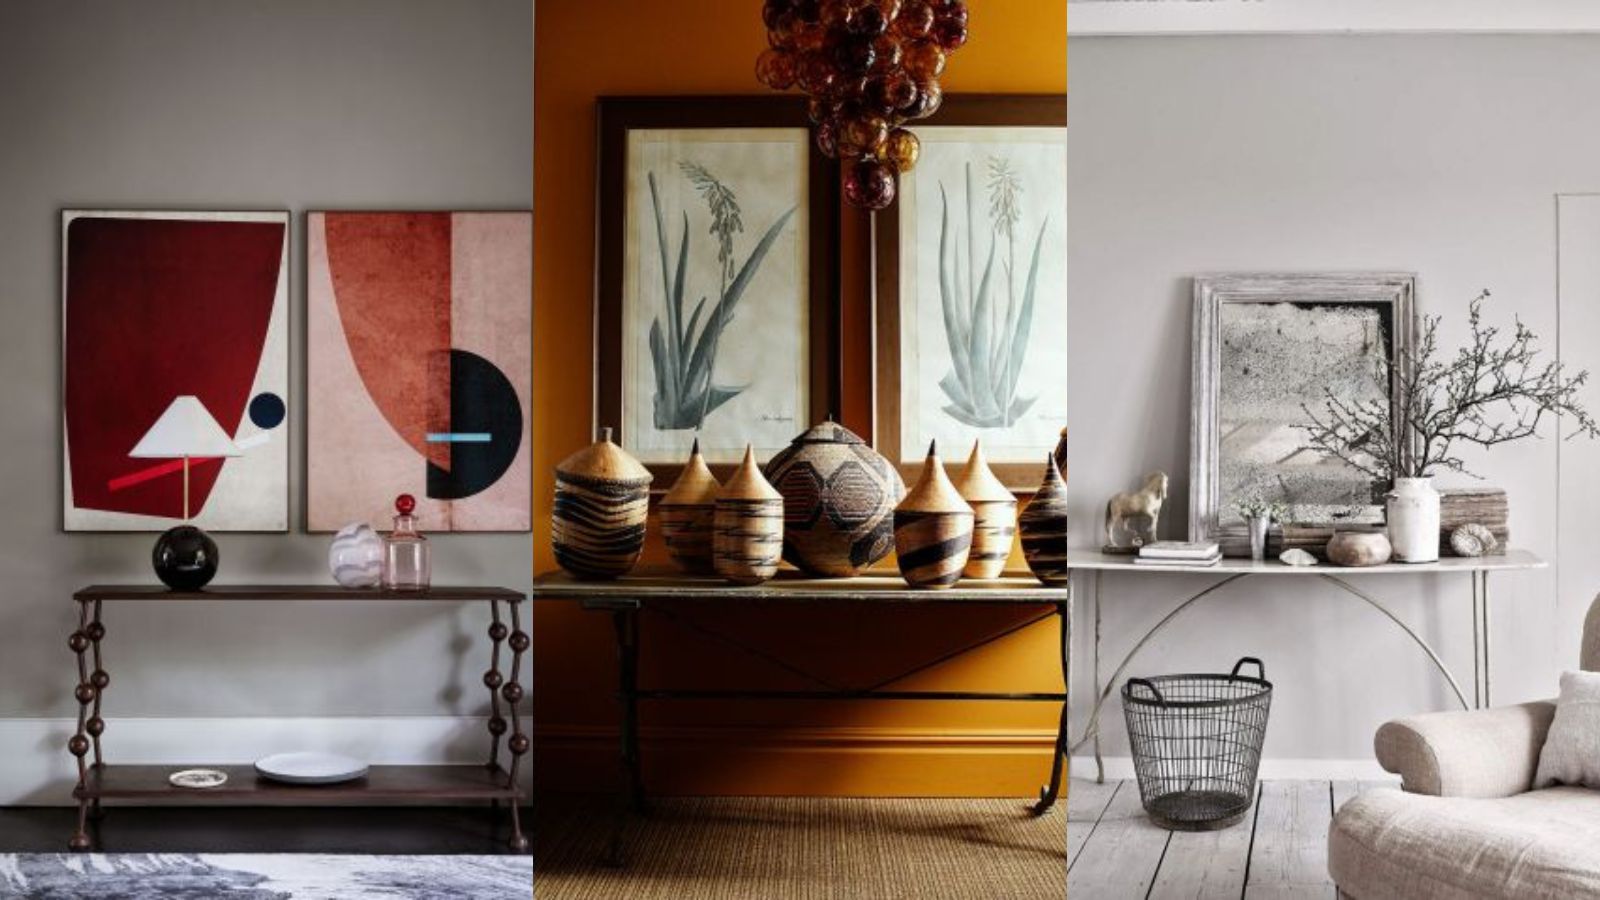 How to style a console table: 18 ideas for entryways and more | Homes ...